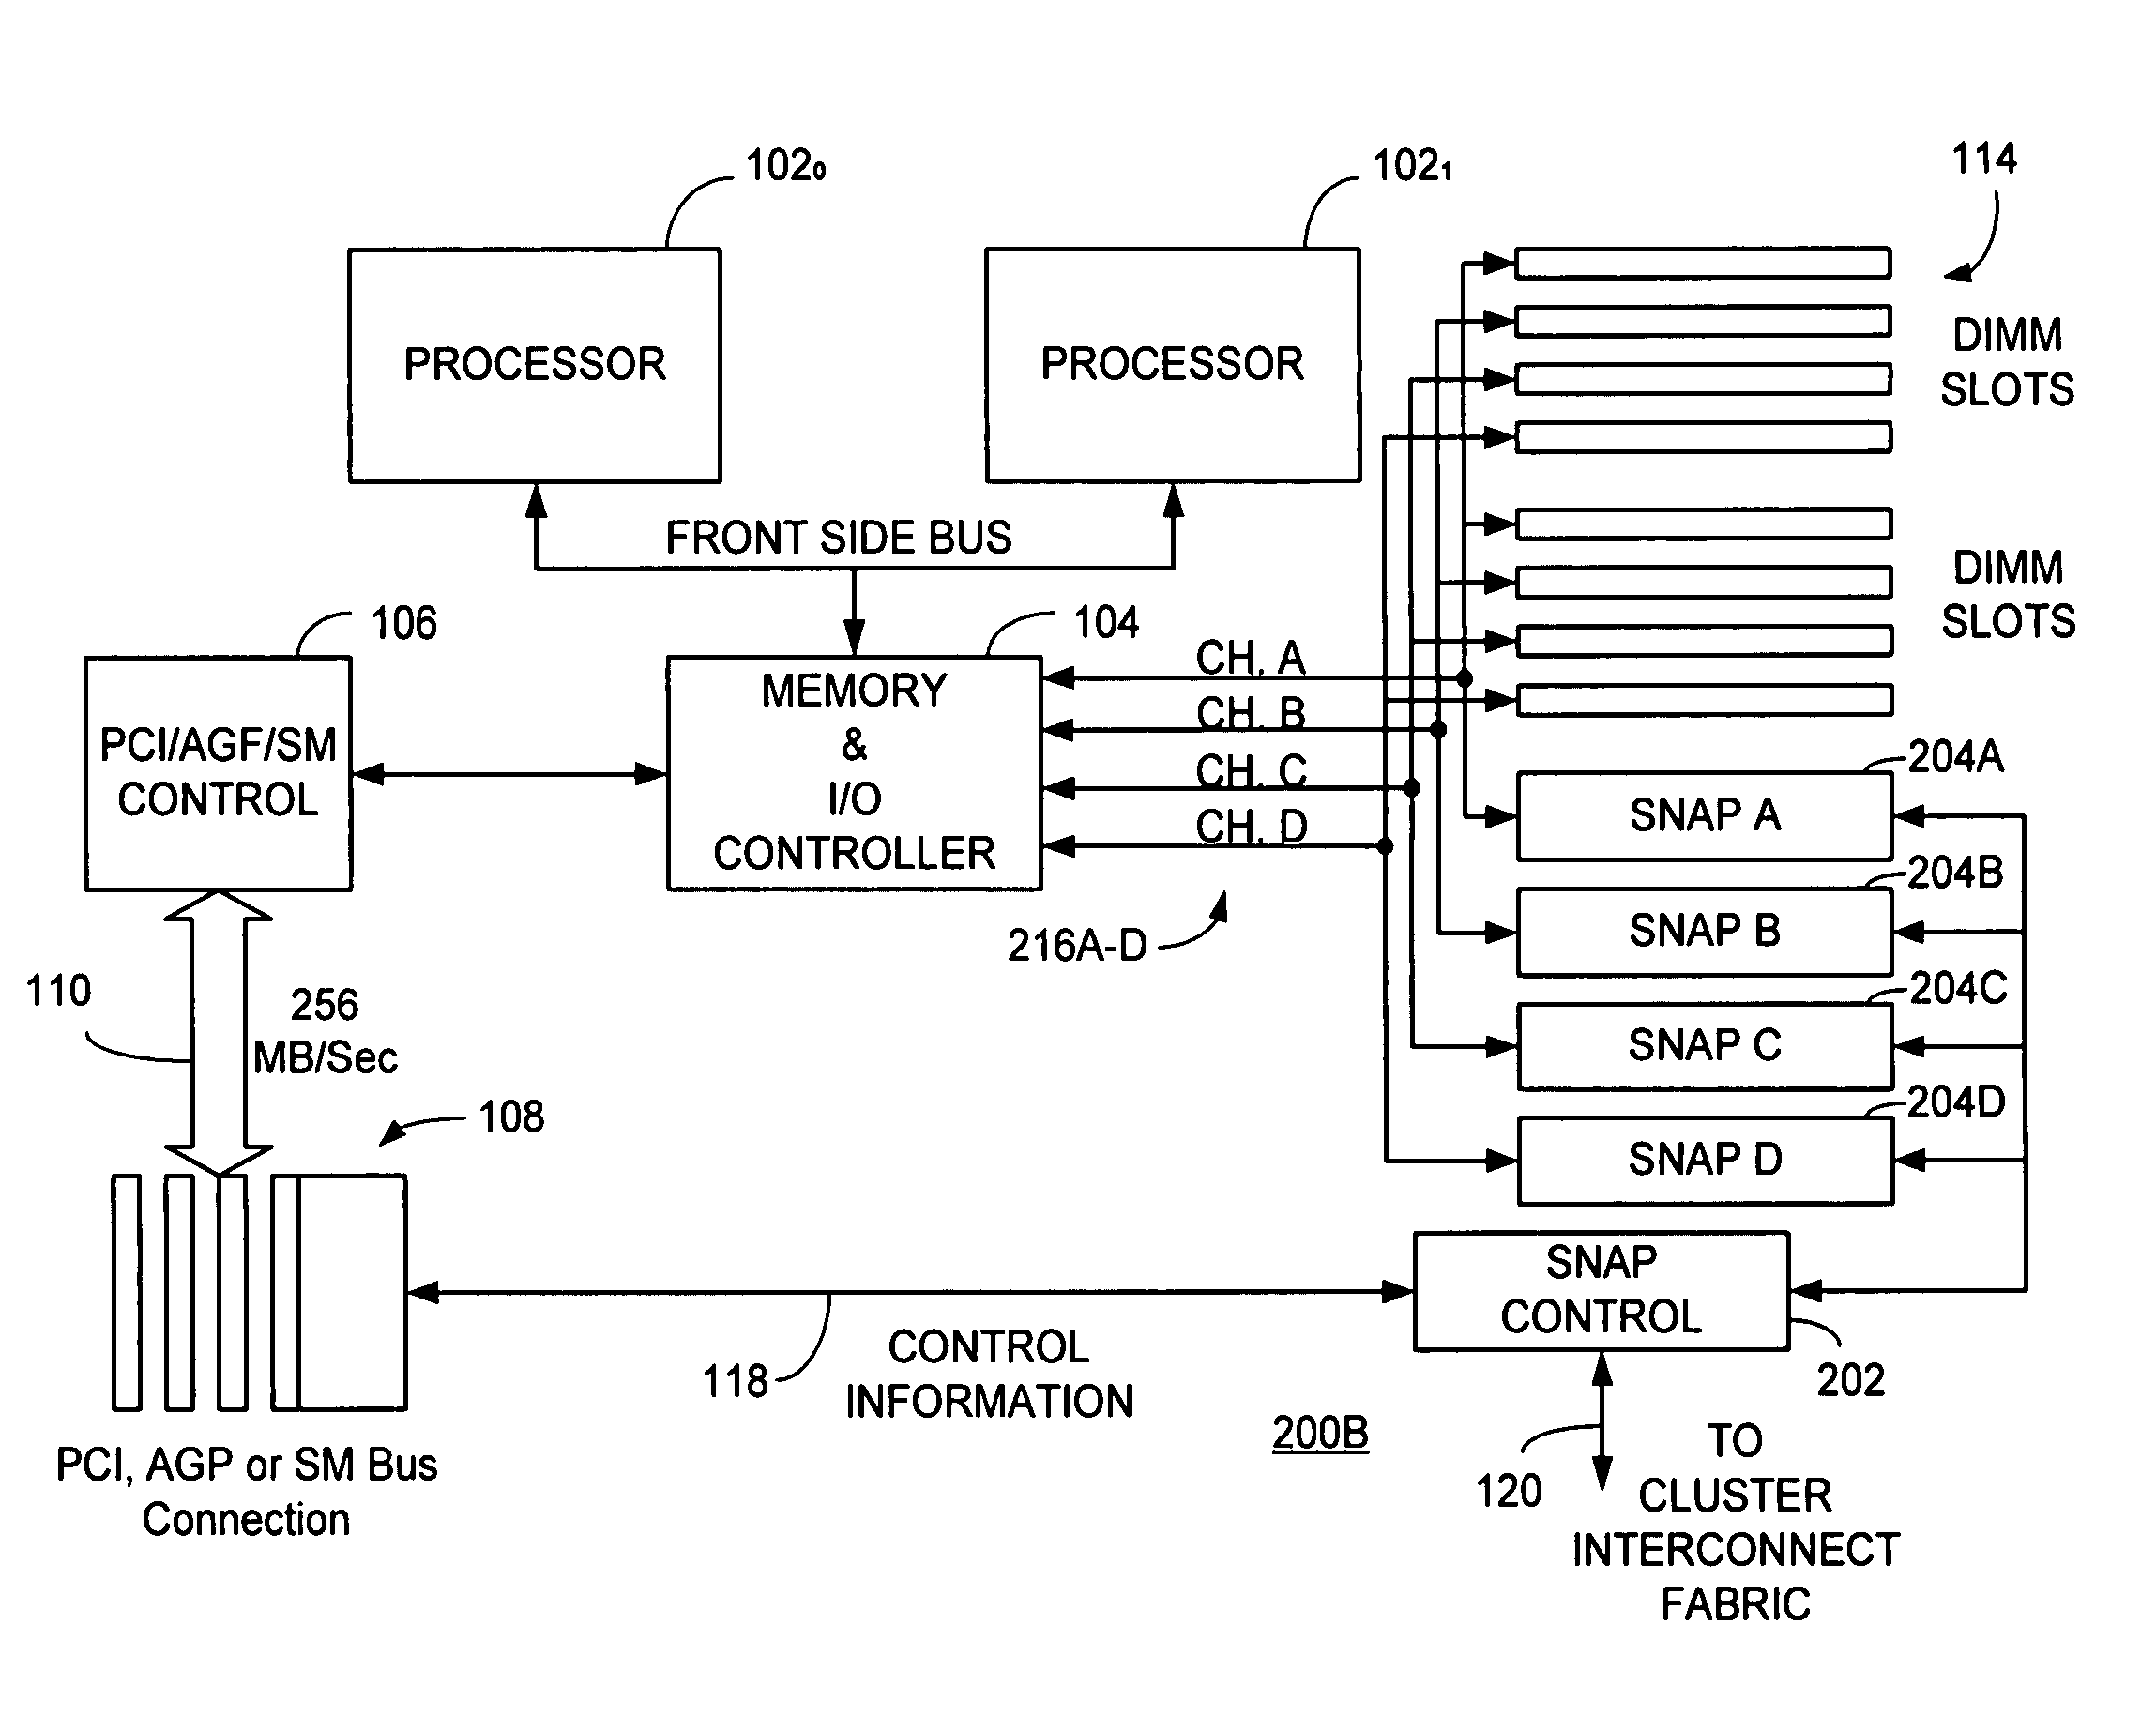 Switch/network adapter port coupling a reconfigurable processing element to one or more microprocessors for use with interleaved memory controllers